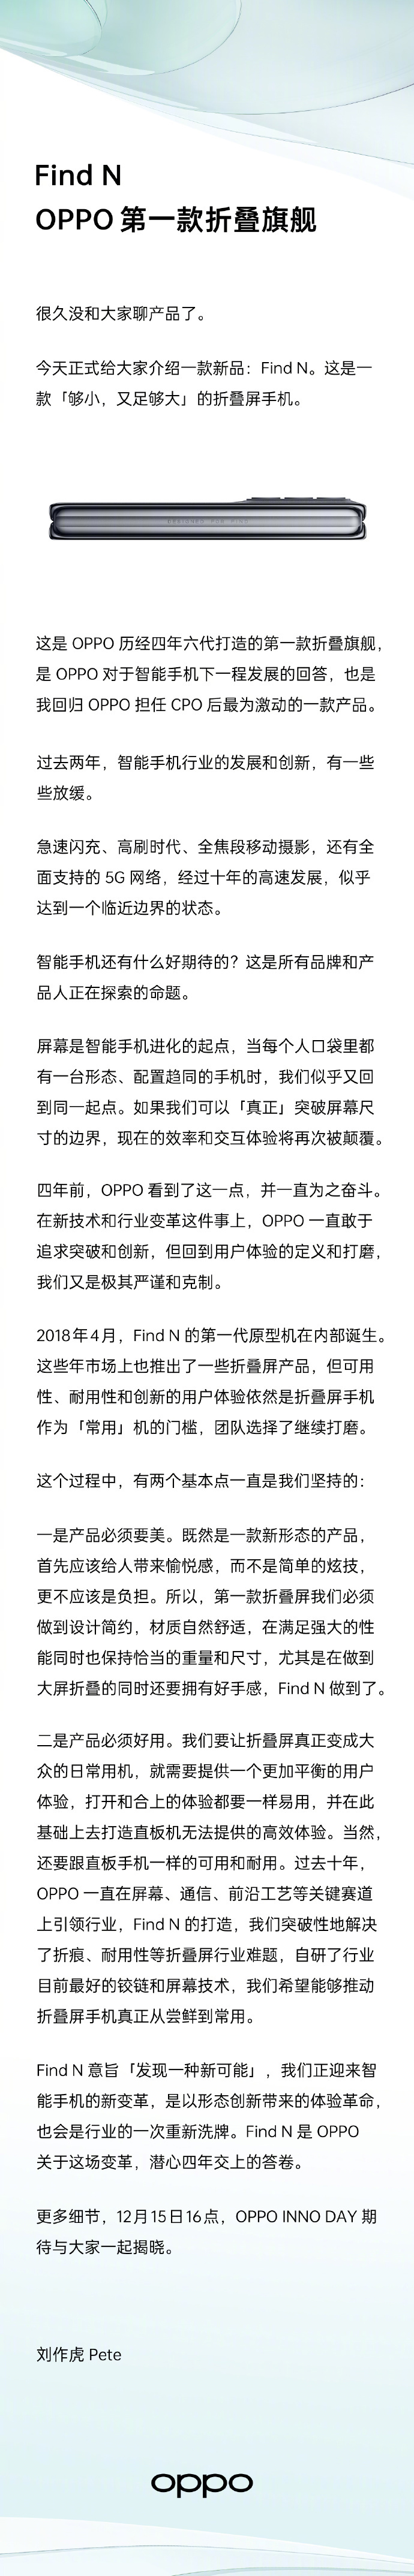 OPPO首款折叠屏OPPO Find N 官宣